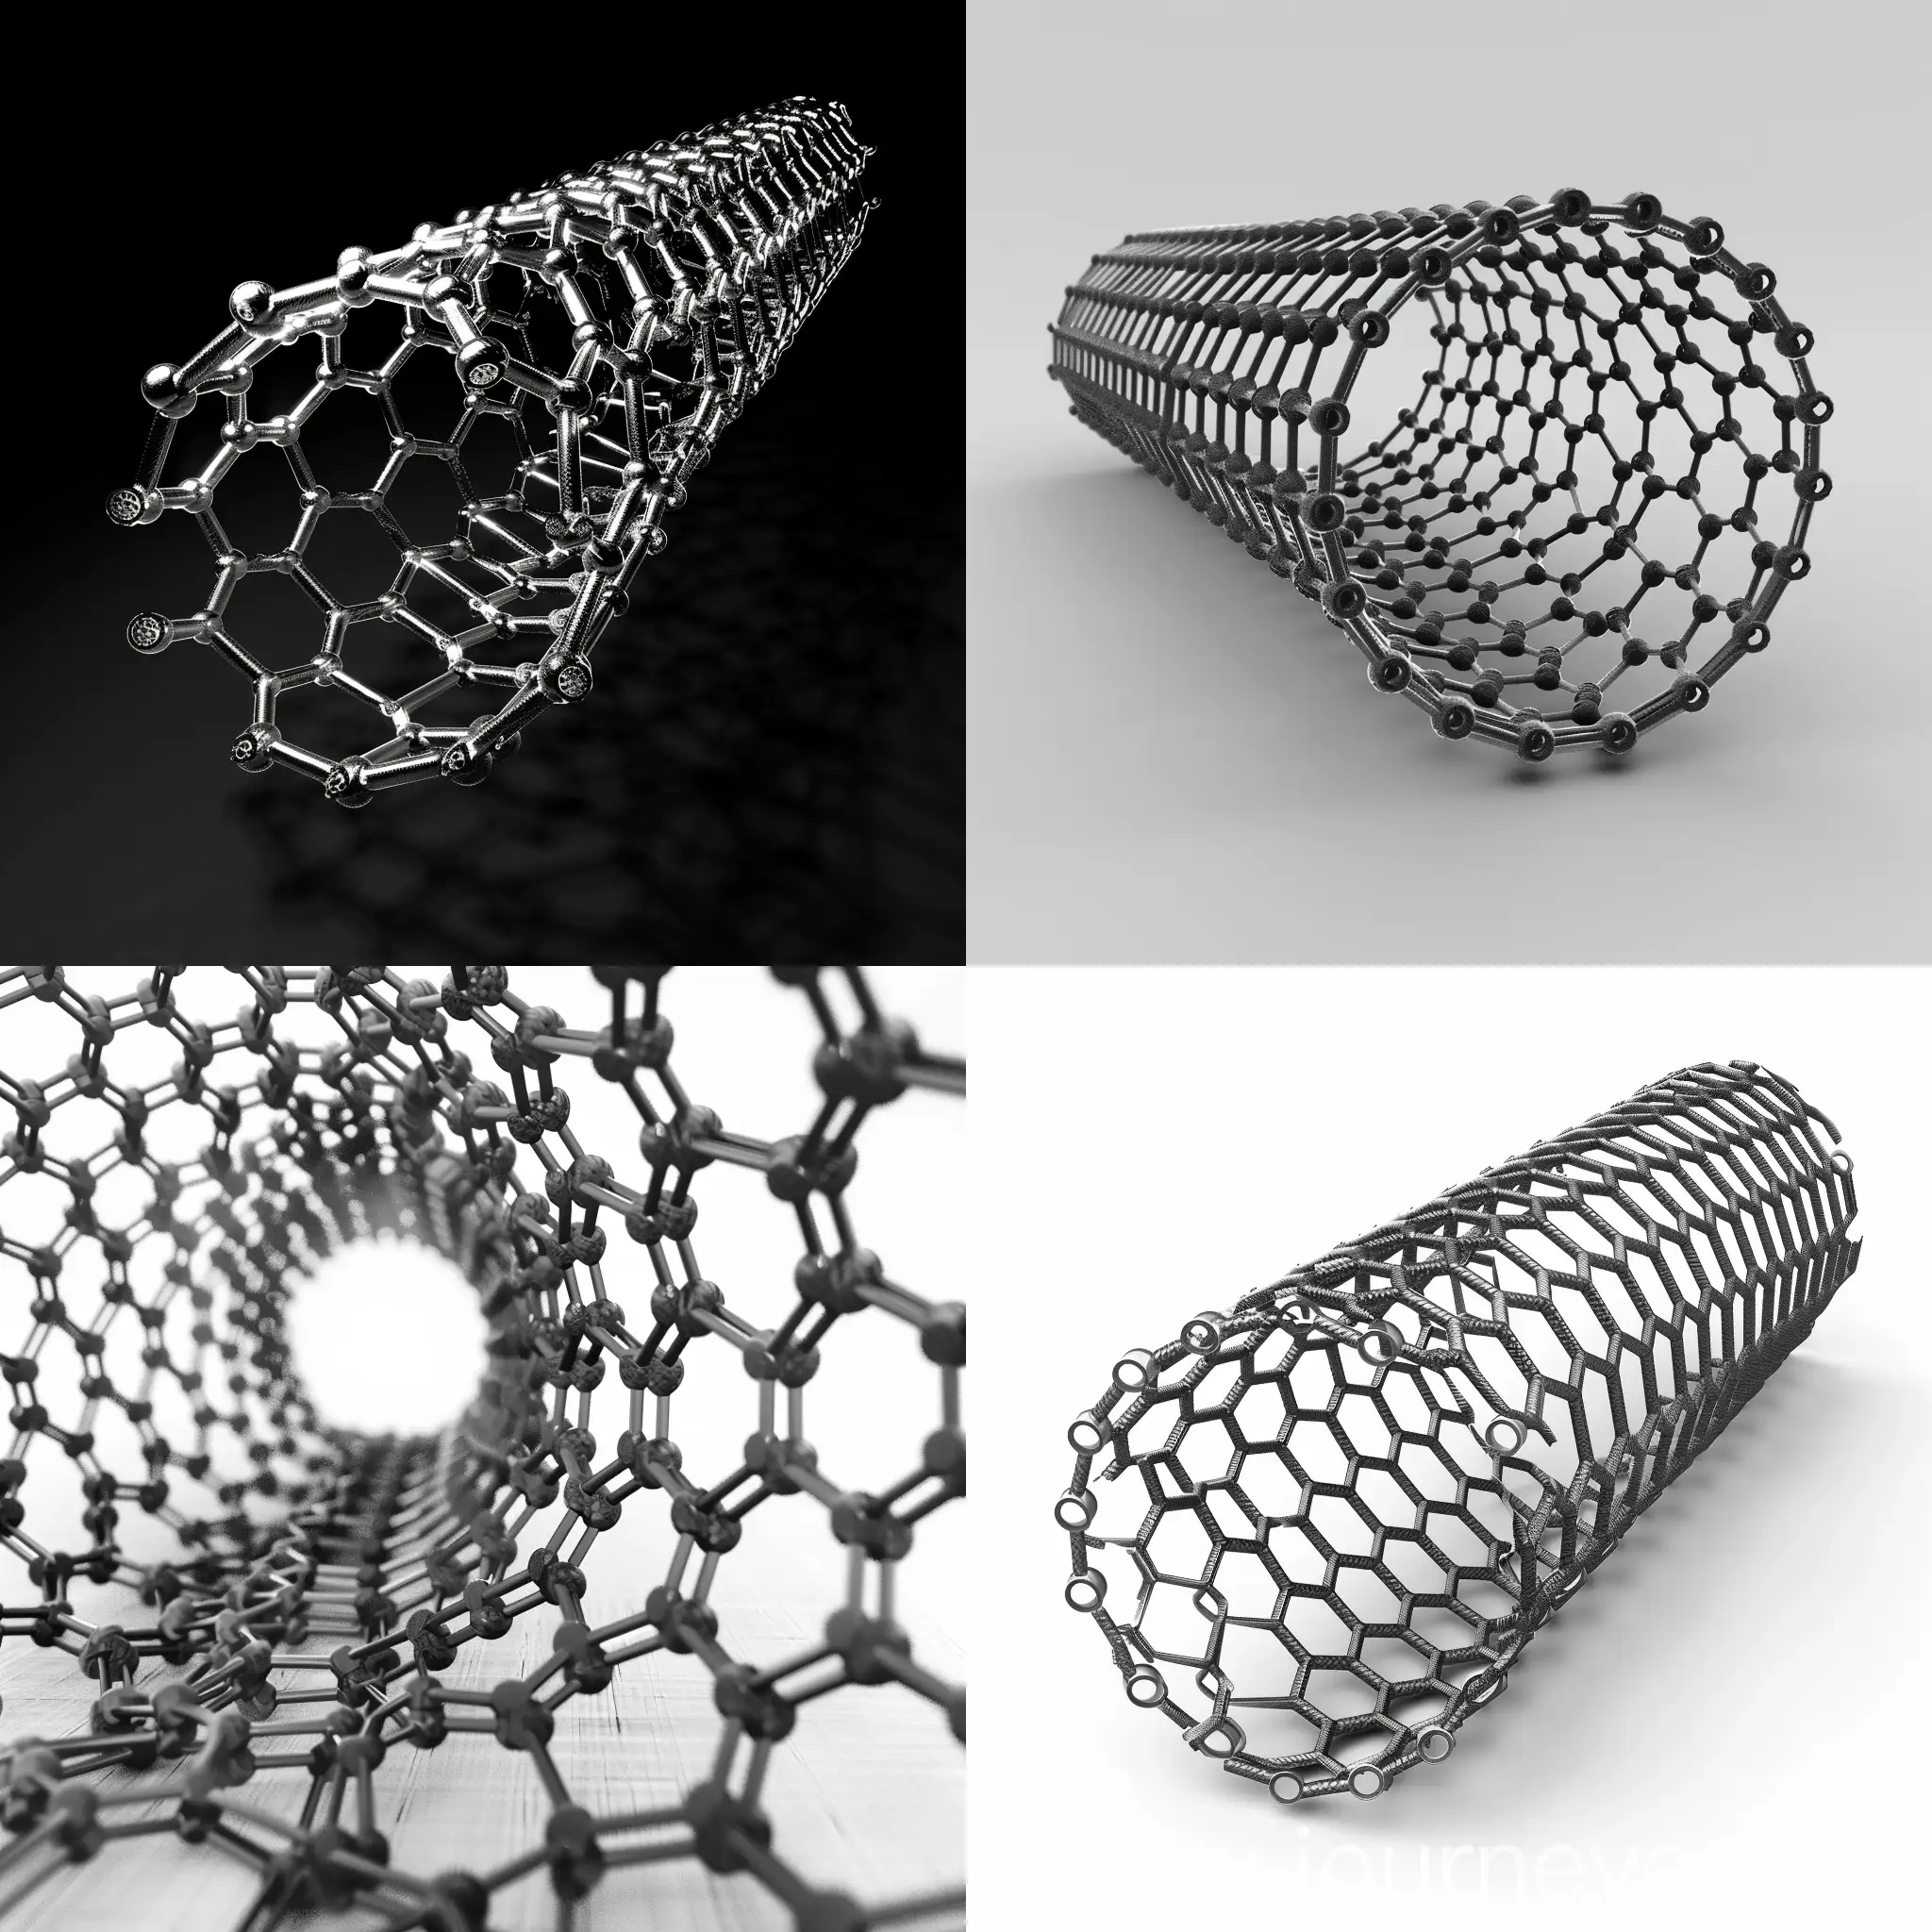 SingleWalled-Carbon-Nanotube-Structure-Visualization